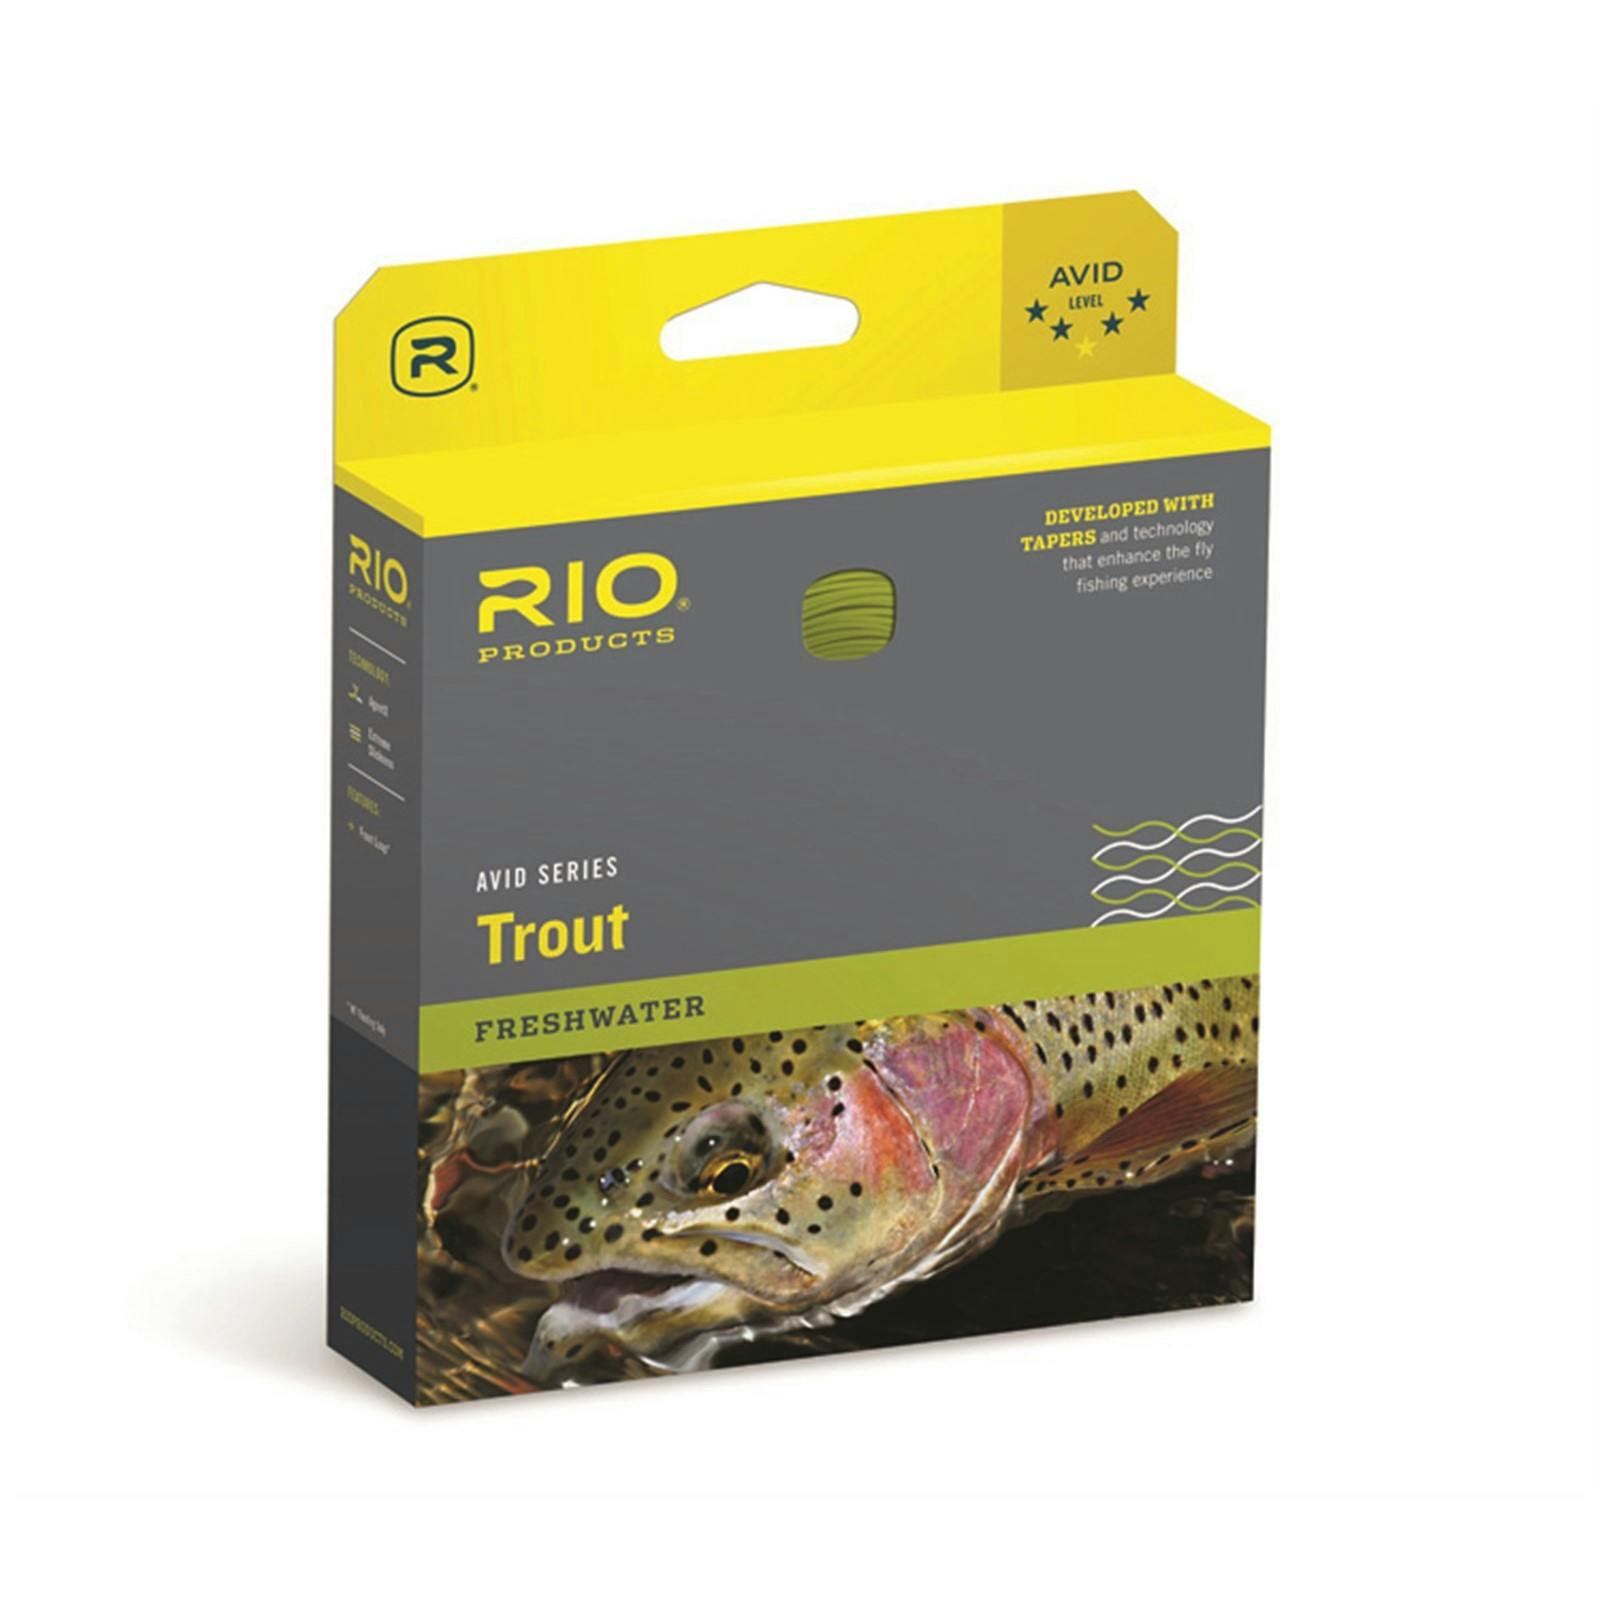 Rio Freshwater Avid & Mainstream Avid Series Trout Fly Line